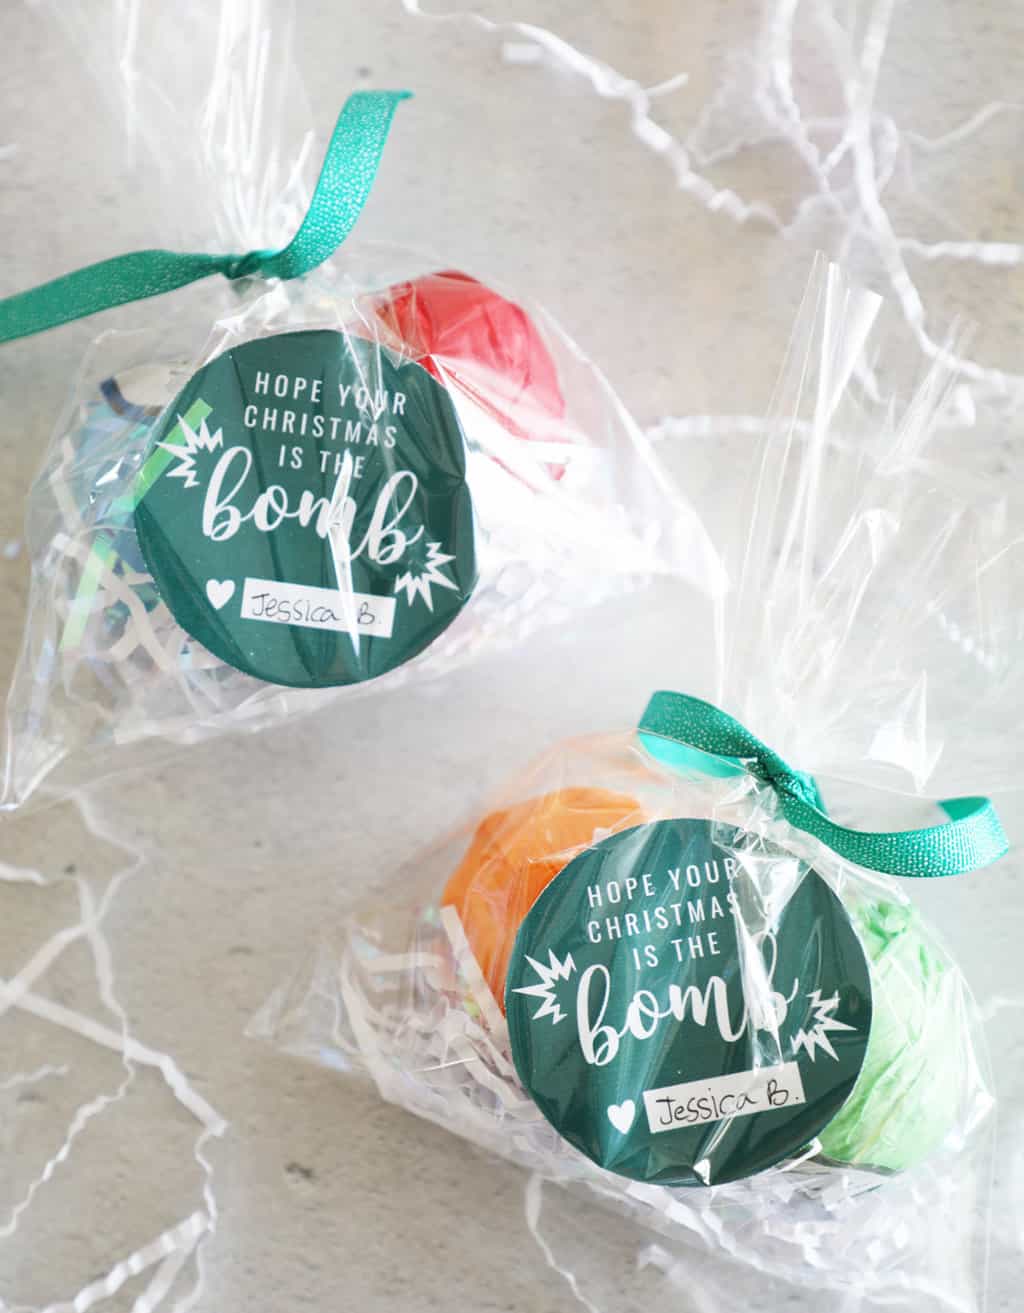 Two small bath bomb gifts with green circular tags tied with green ribbon.